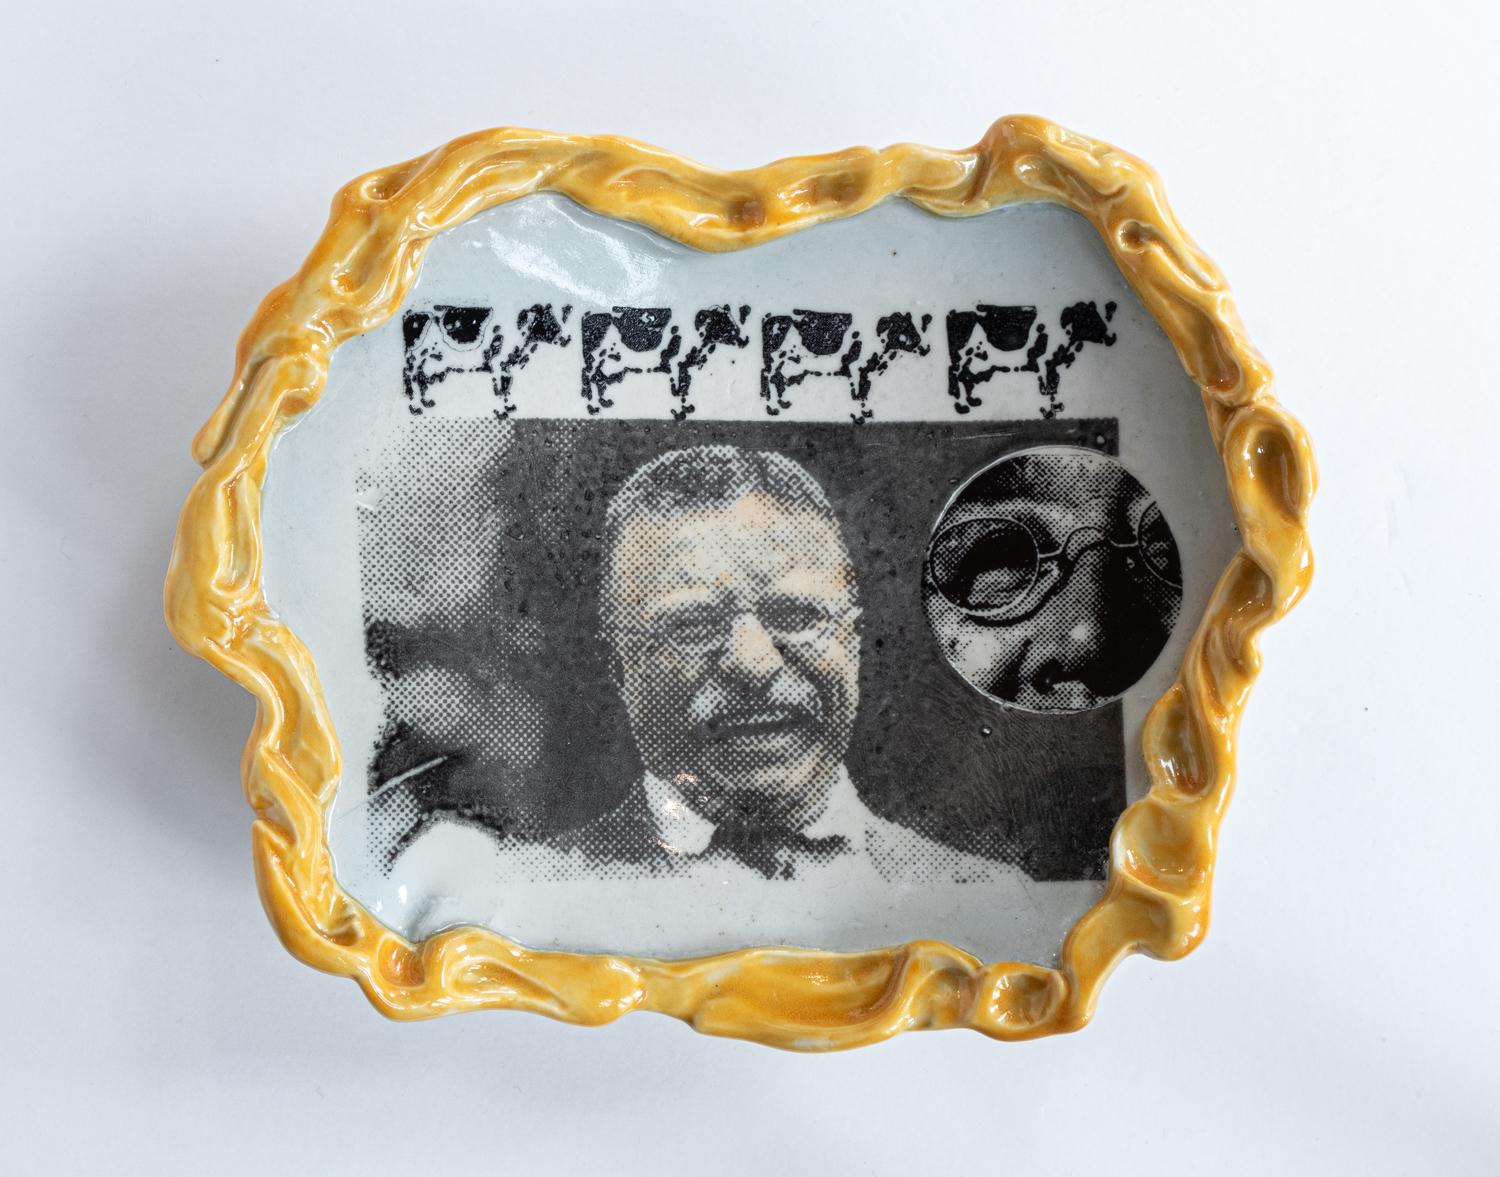 Pop Culture Ceramic Plate, "Teddy With Meat"